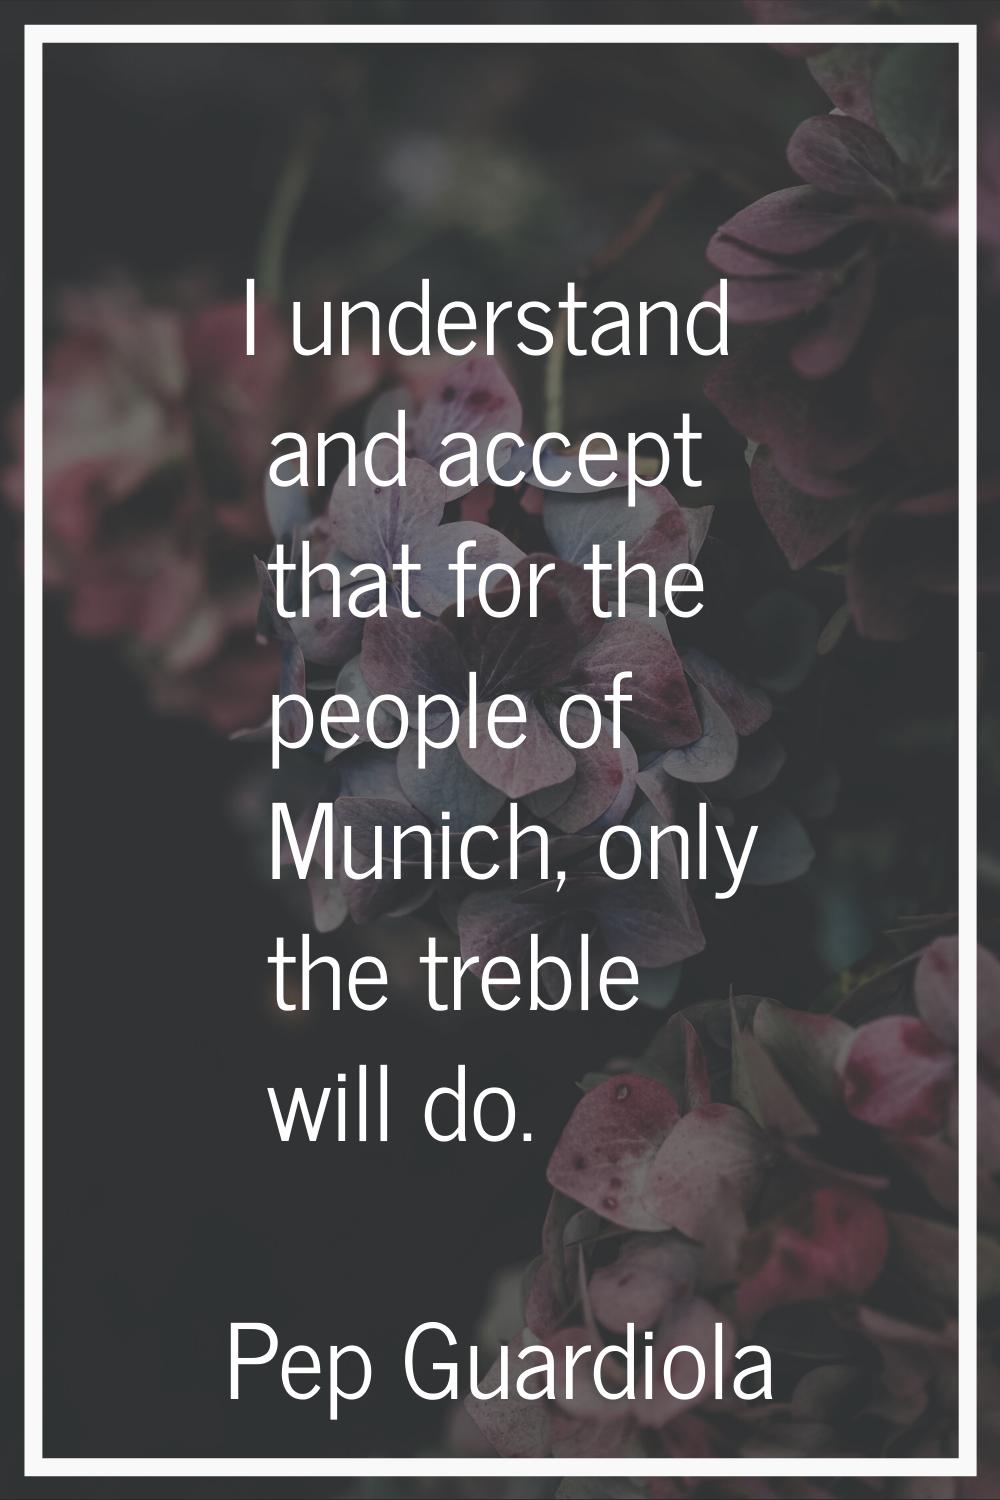 I understand and accept that for the people of Munich, only the treble will do.